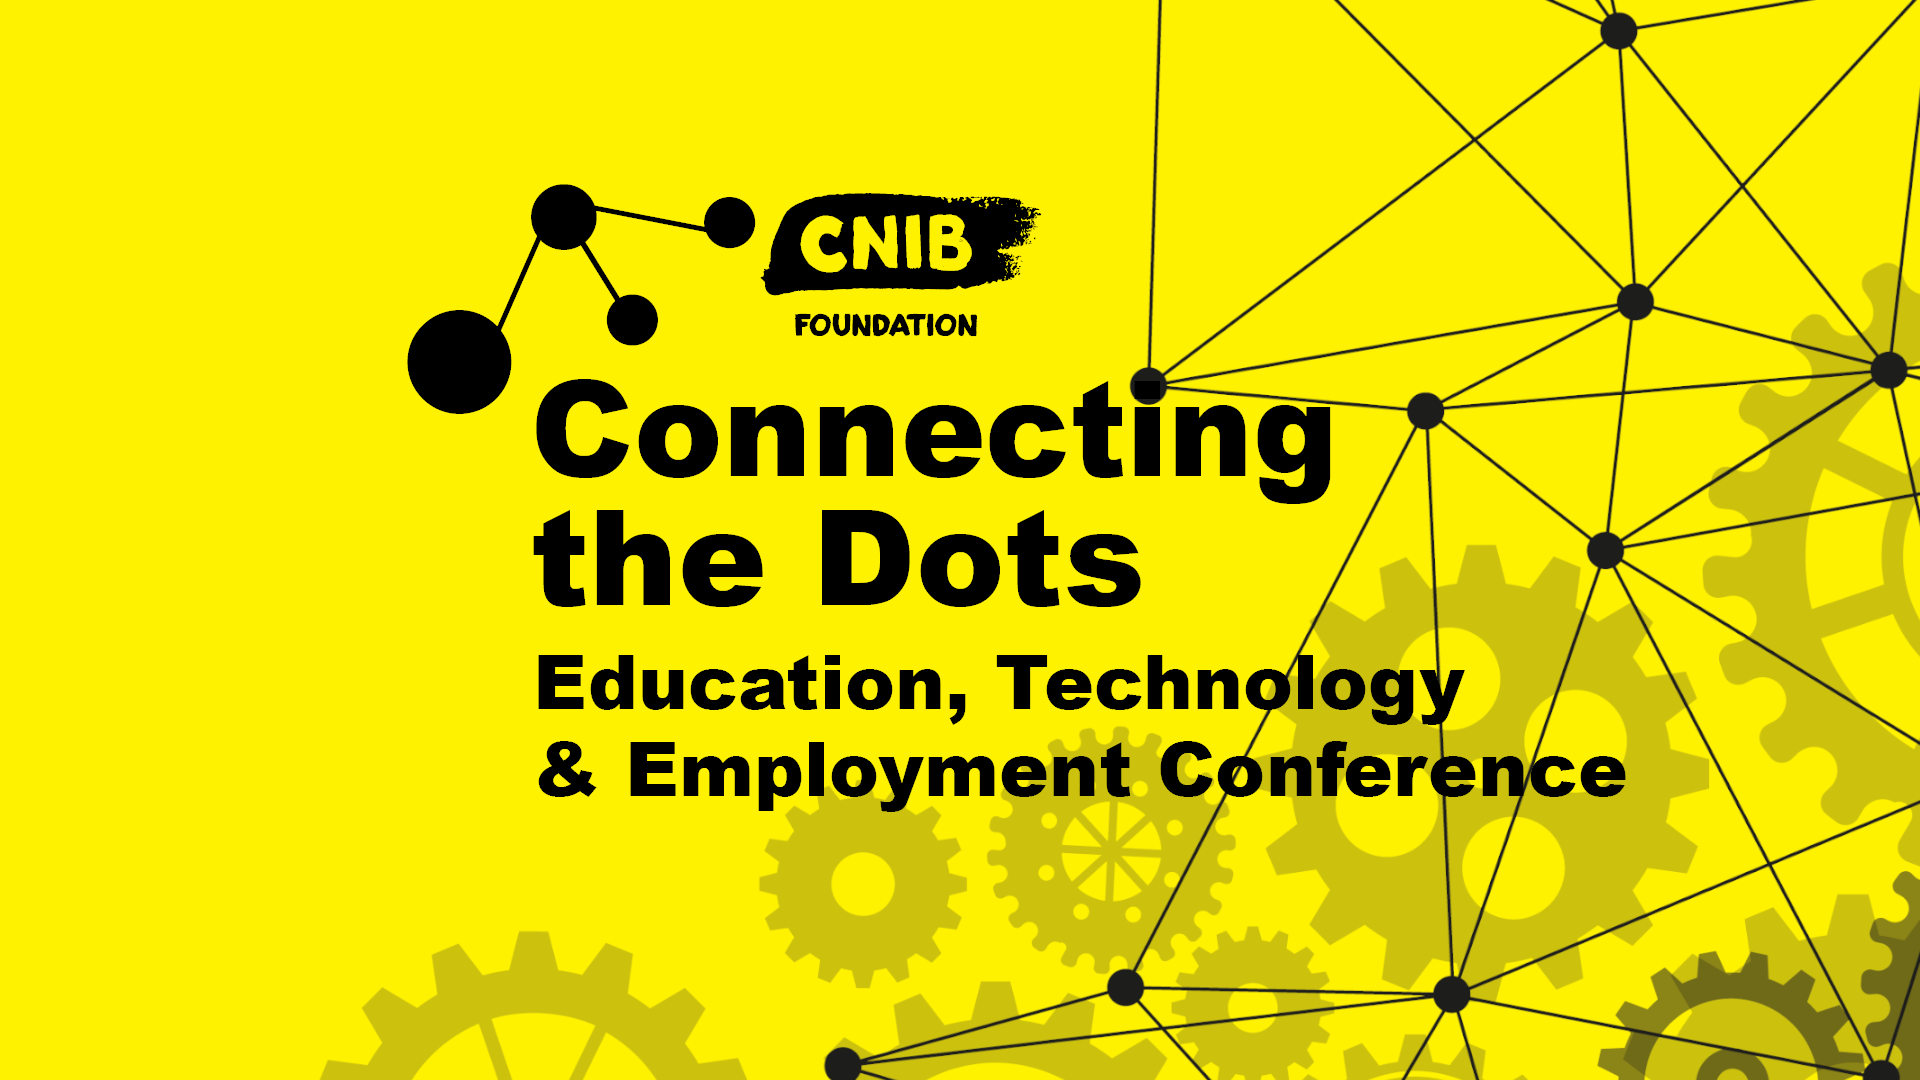 CNIB Connecting the dots logo with the text: Education,  Technology and Employment Conference, on a yellow background with gears and dots that are connected together.